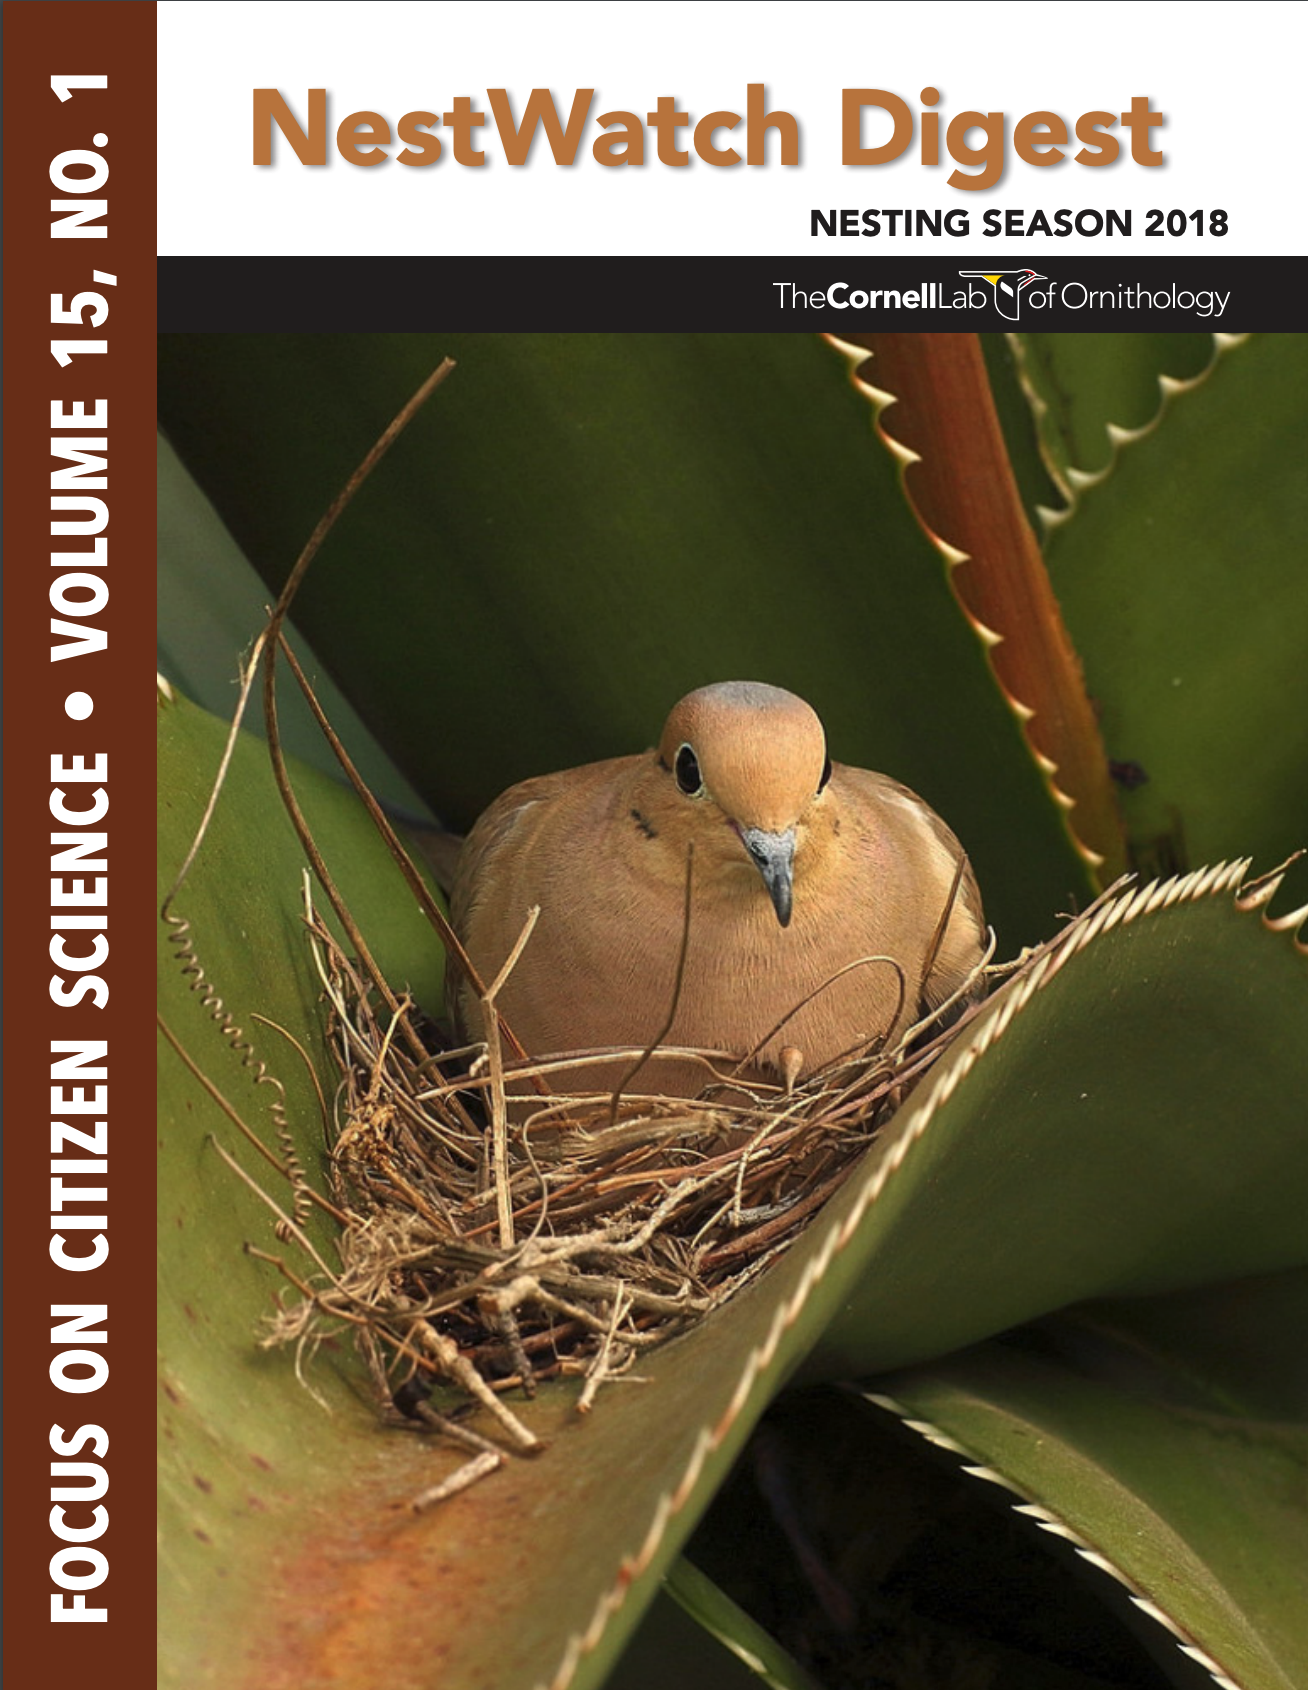 nestwatch 2018 annual report